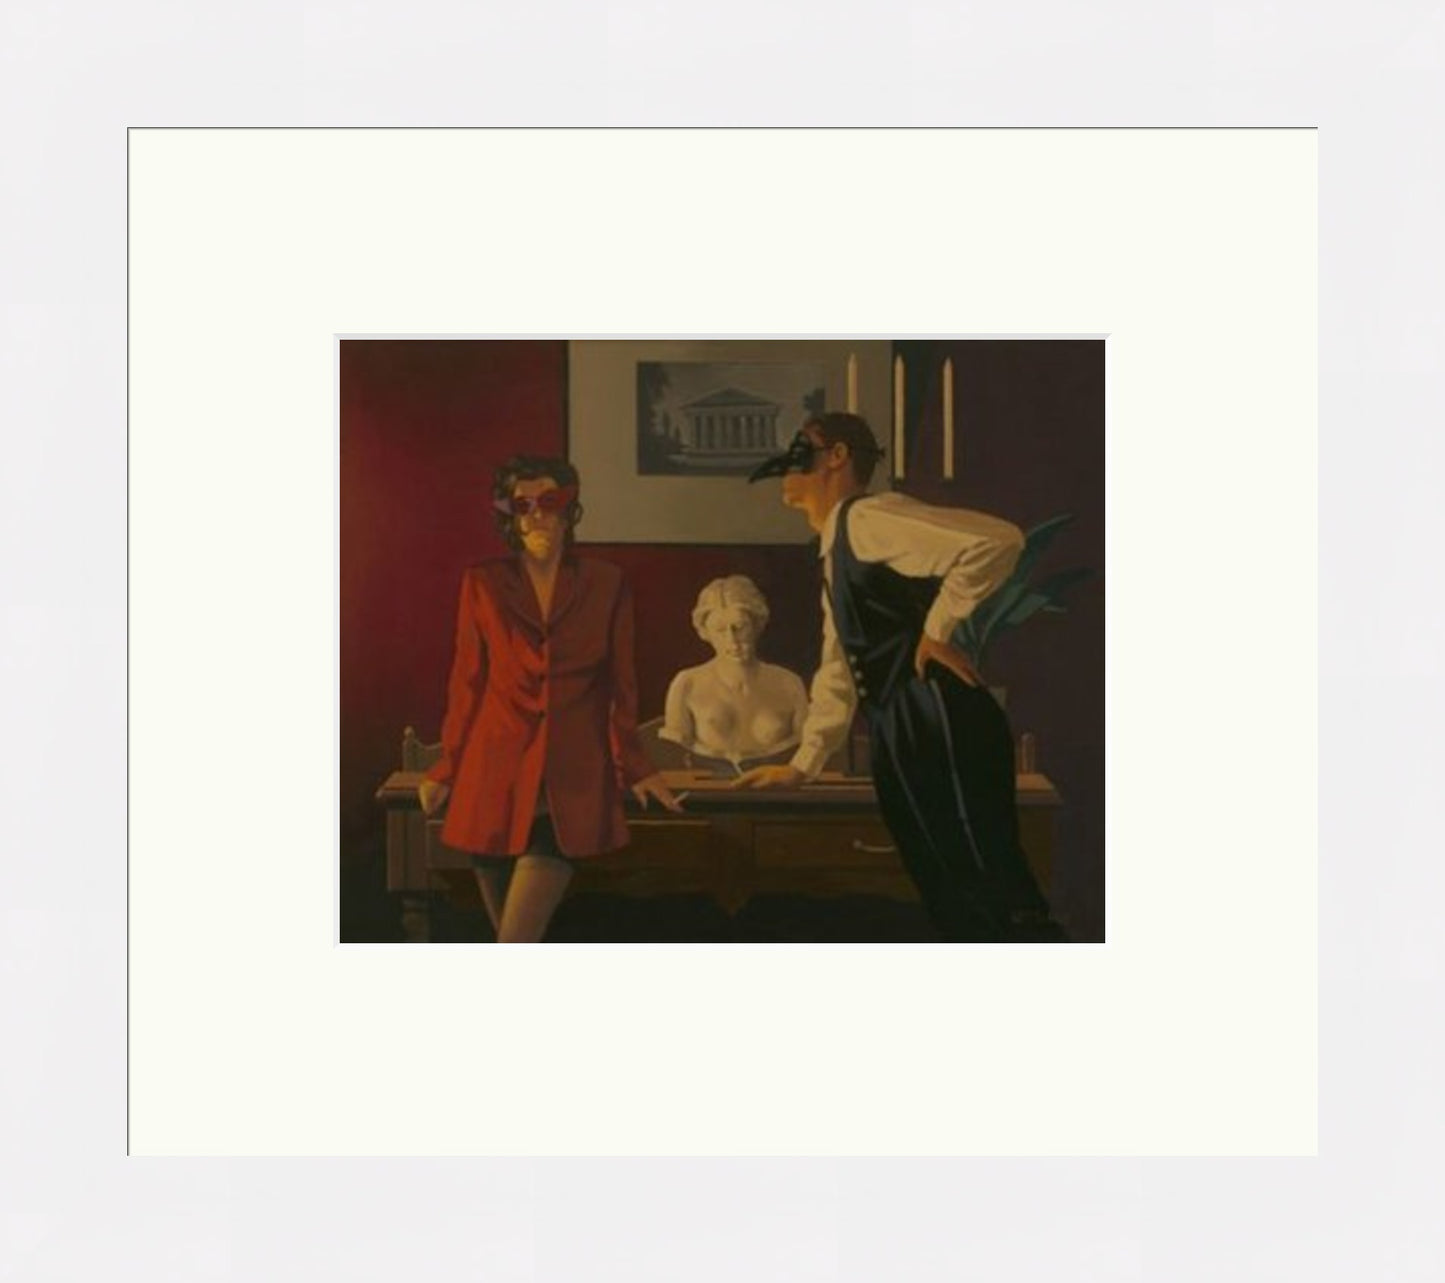 Sparrow and the Hawk by Jack Vettriano - Petite